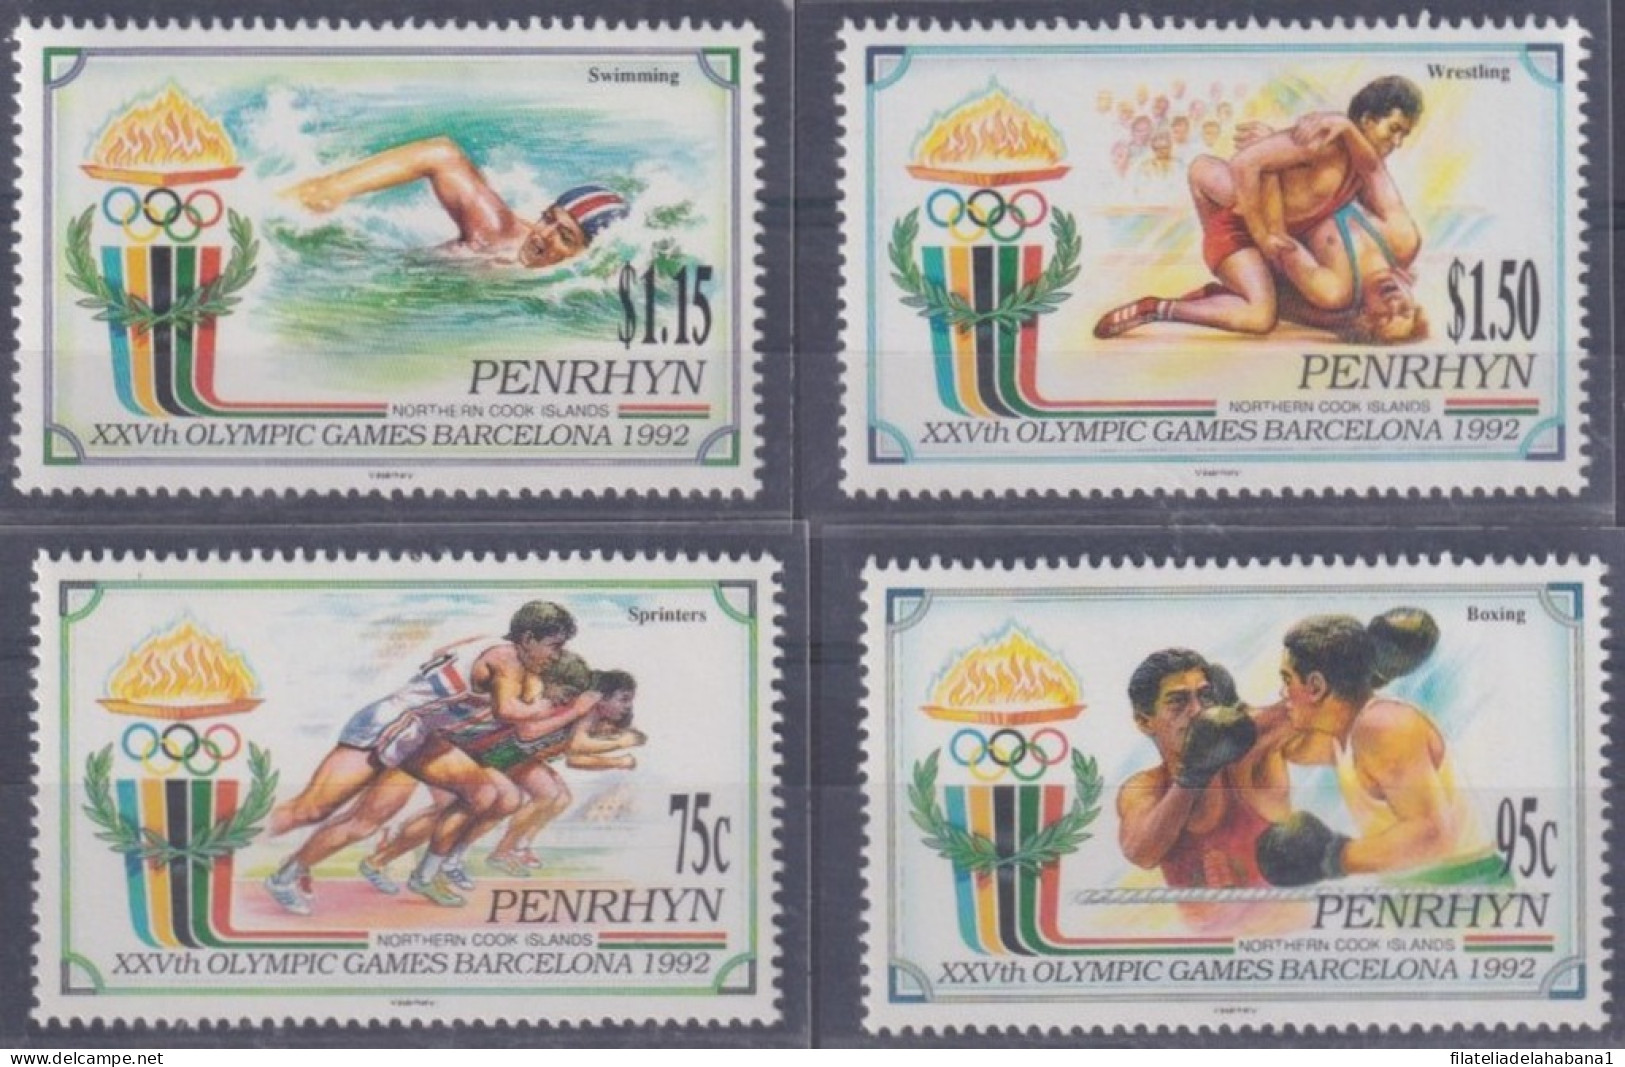 F-EX48930 PENRHYN MNH 1992 OLYMPIC BARCELONA ATHLETISM SPRINTERS BOXING WRESTLING SWIMMING.  - Zomer 1992: Barcelona